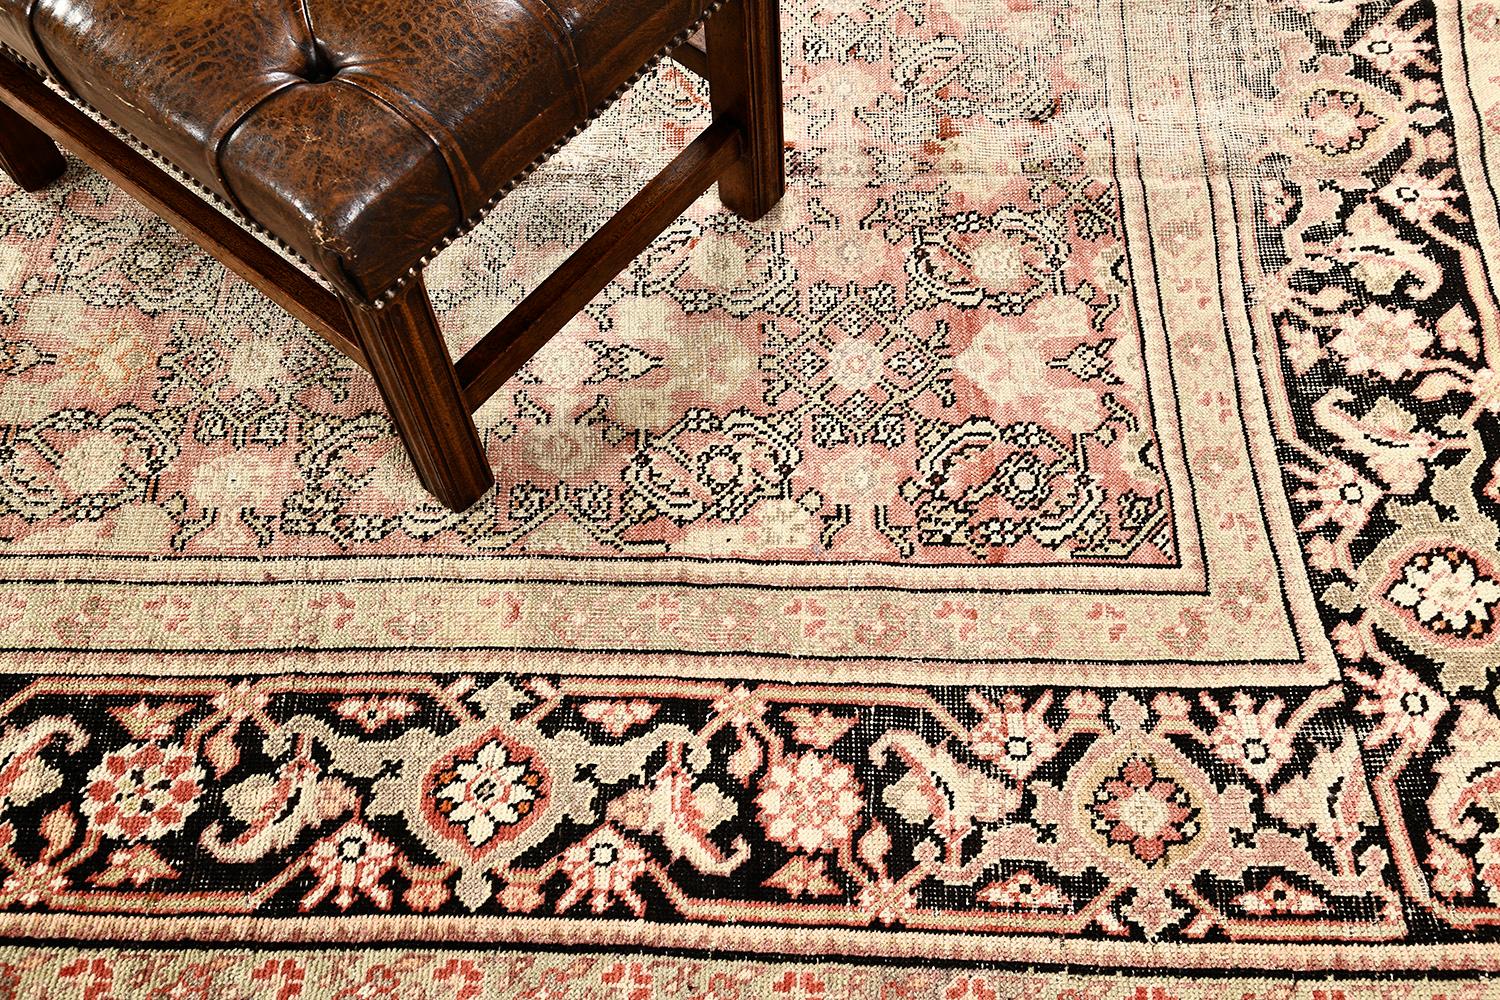 This exceptional Gharabagh runner is perfect for your floors and walls. It is not just for aesthetic value, but, to keep you warm as well. It features an array of motifs and elements in vivid and flamboyant colors, perfectly hand-woven geometrically